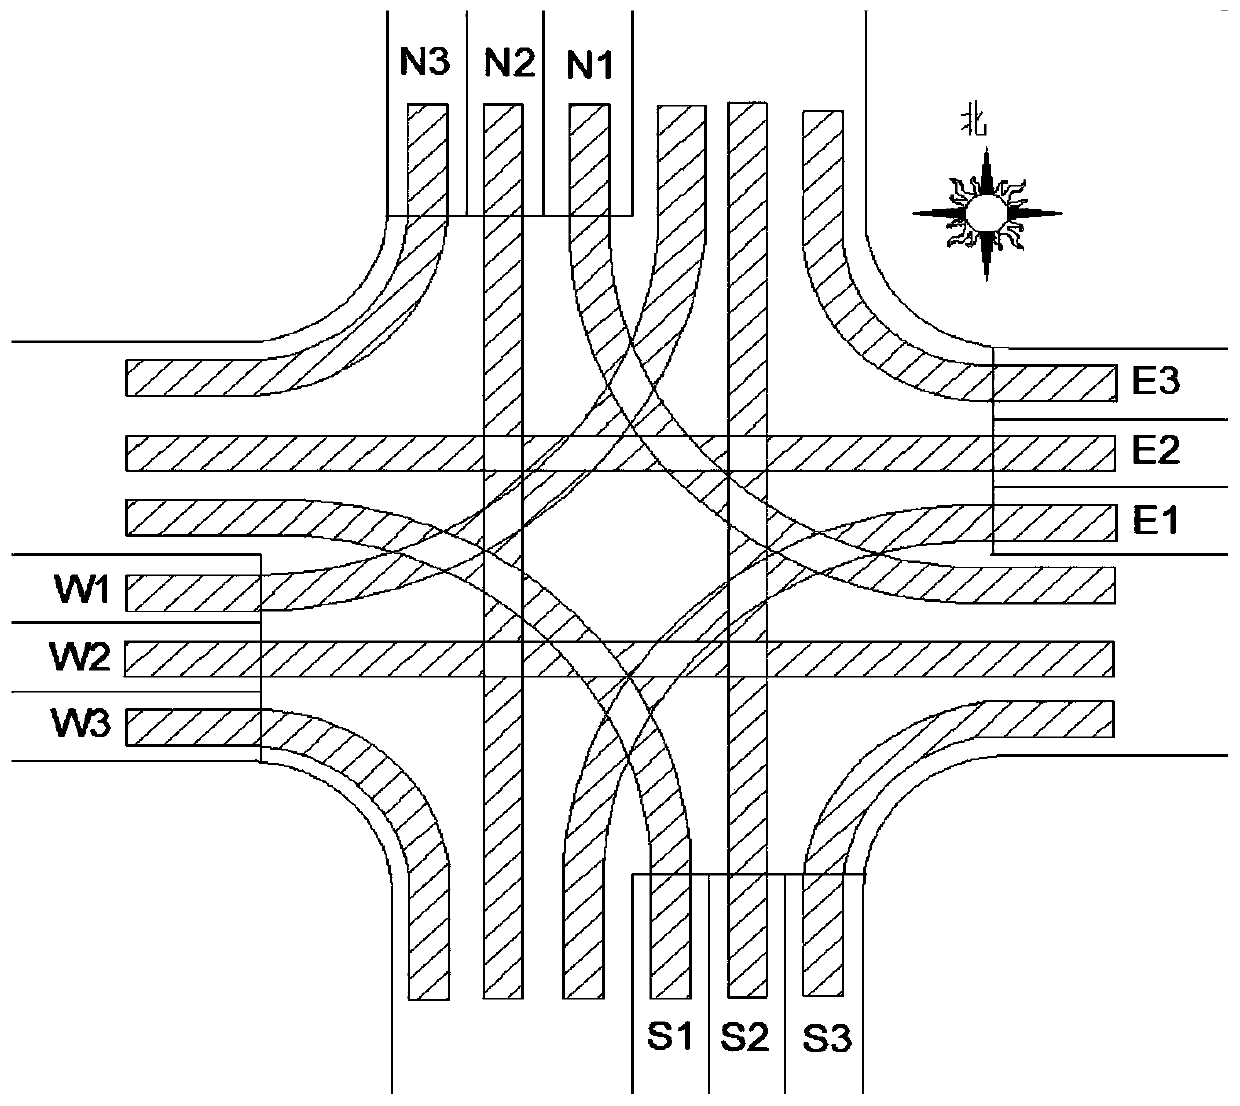 A Method for Predicting the Conflict Probability of Motor Vehicles at Signal Controlled Intersections